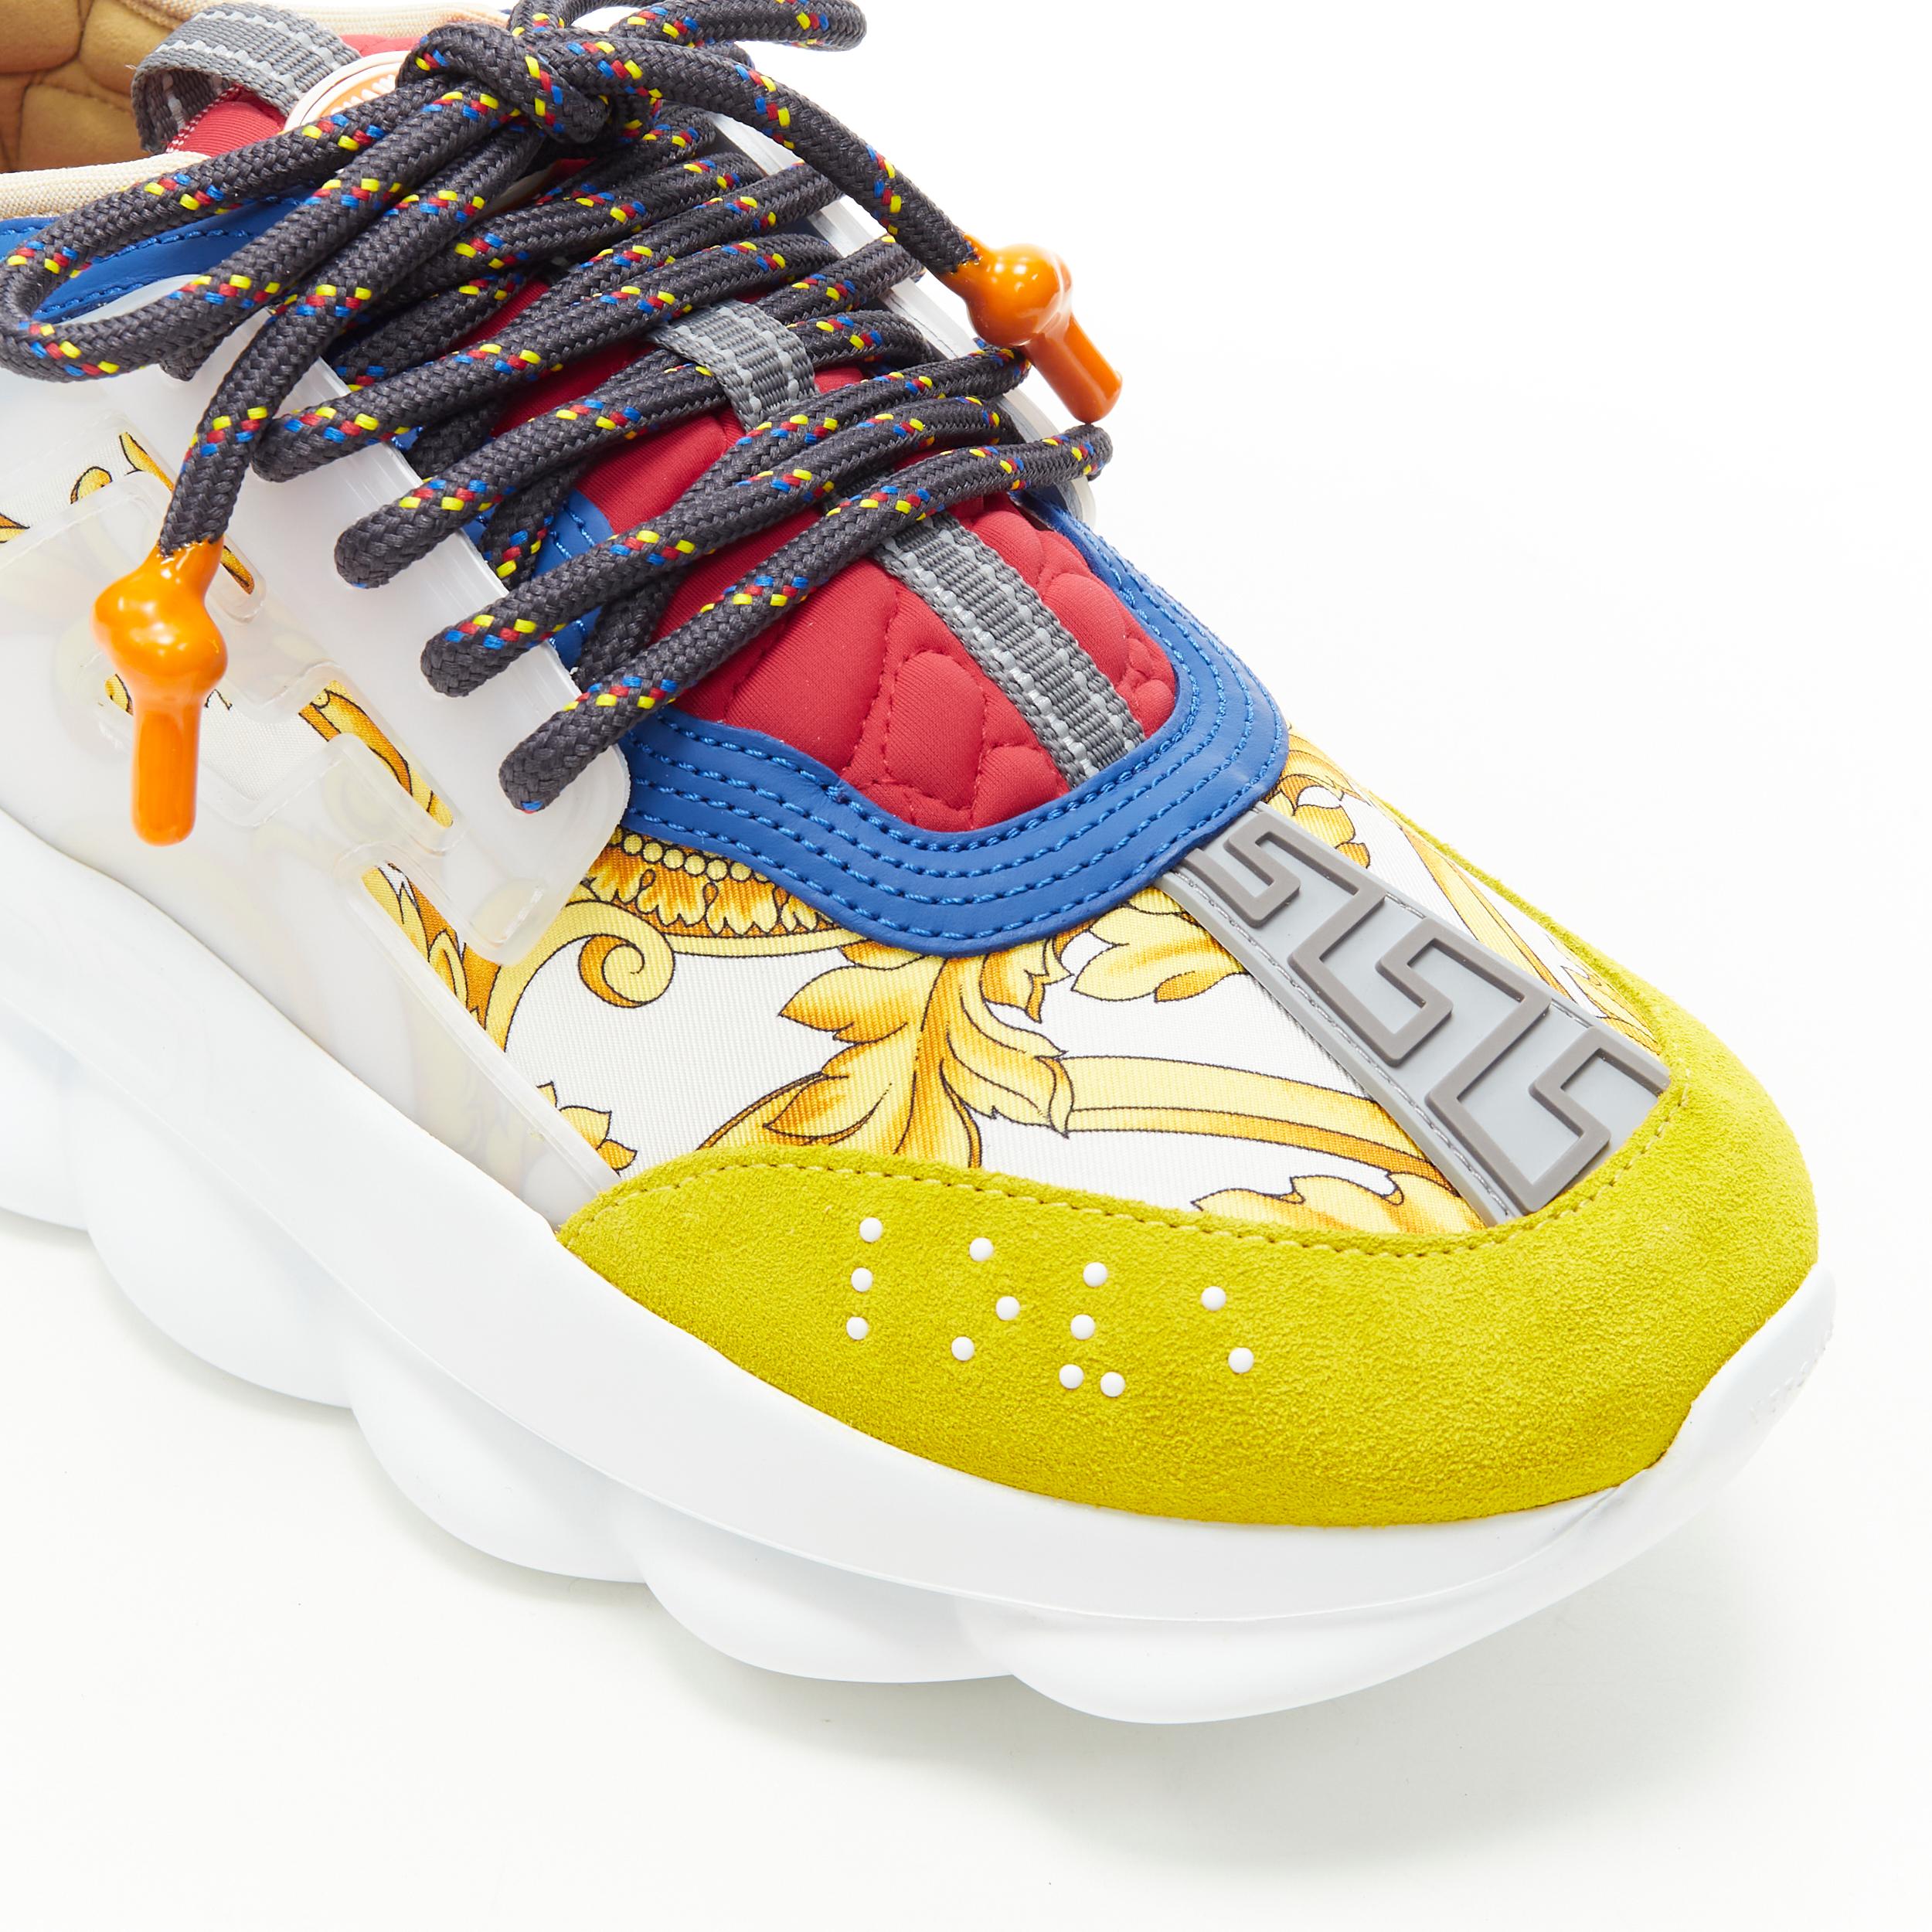 Men's new VERSACE Chain Reaction gold barocco twill yellow blue suede sneaker EU40 US7